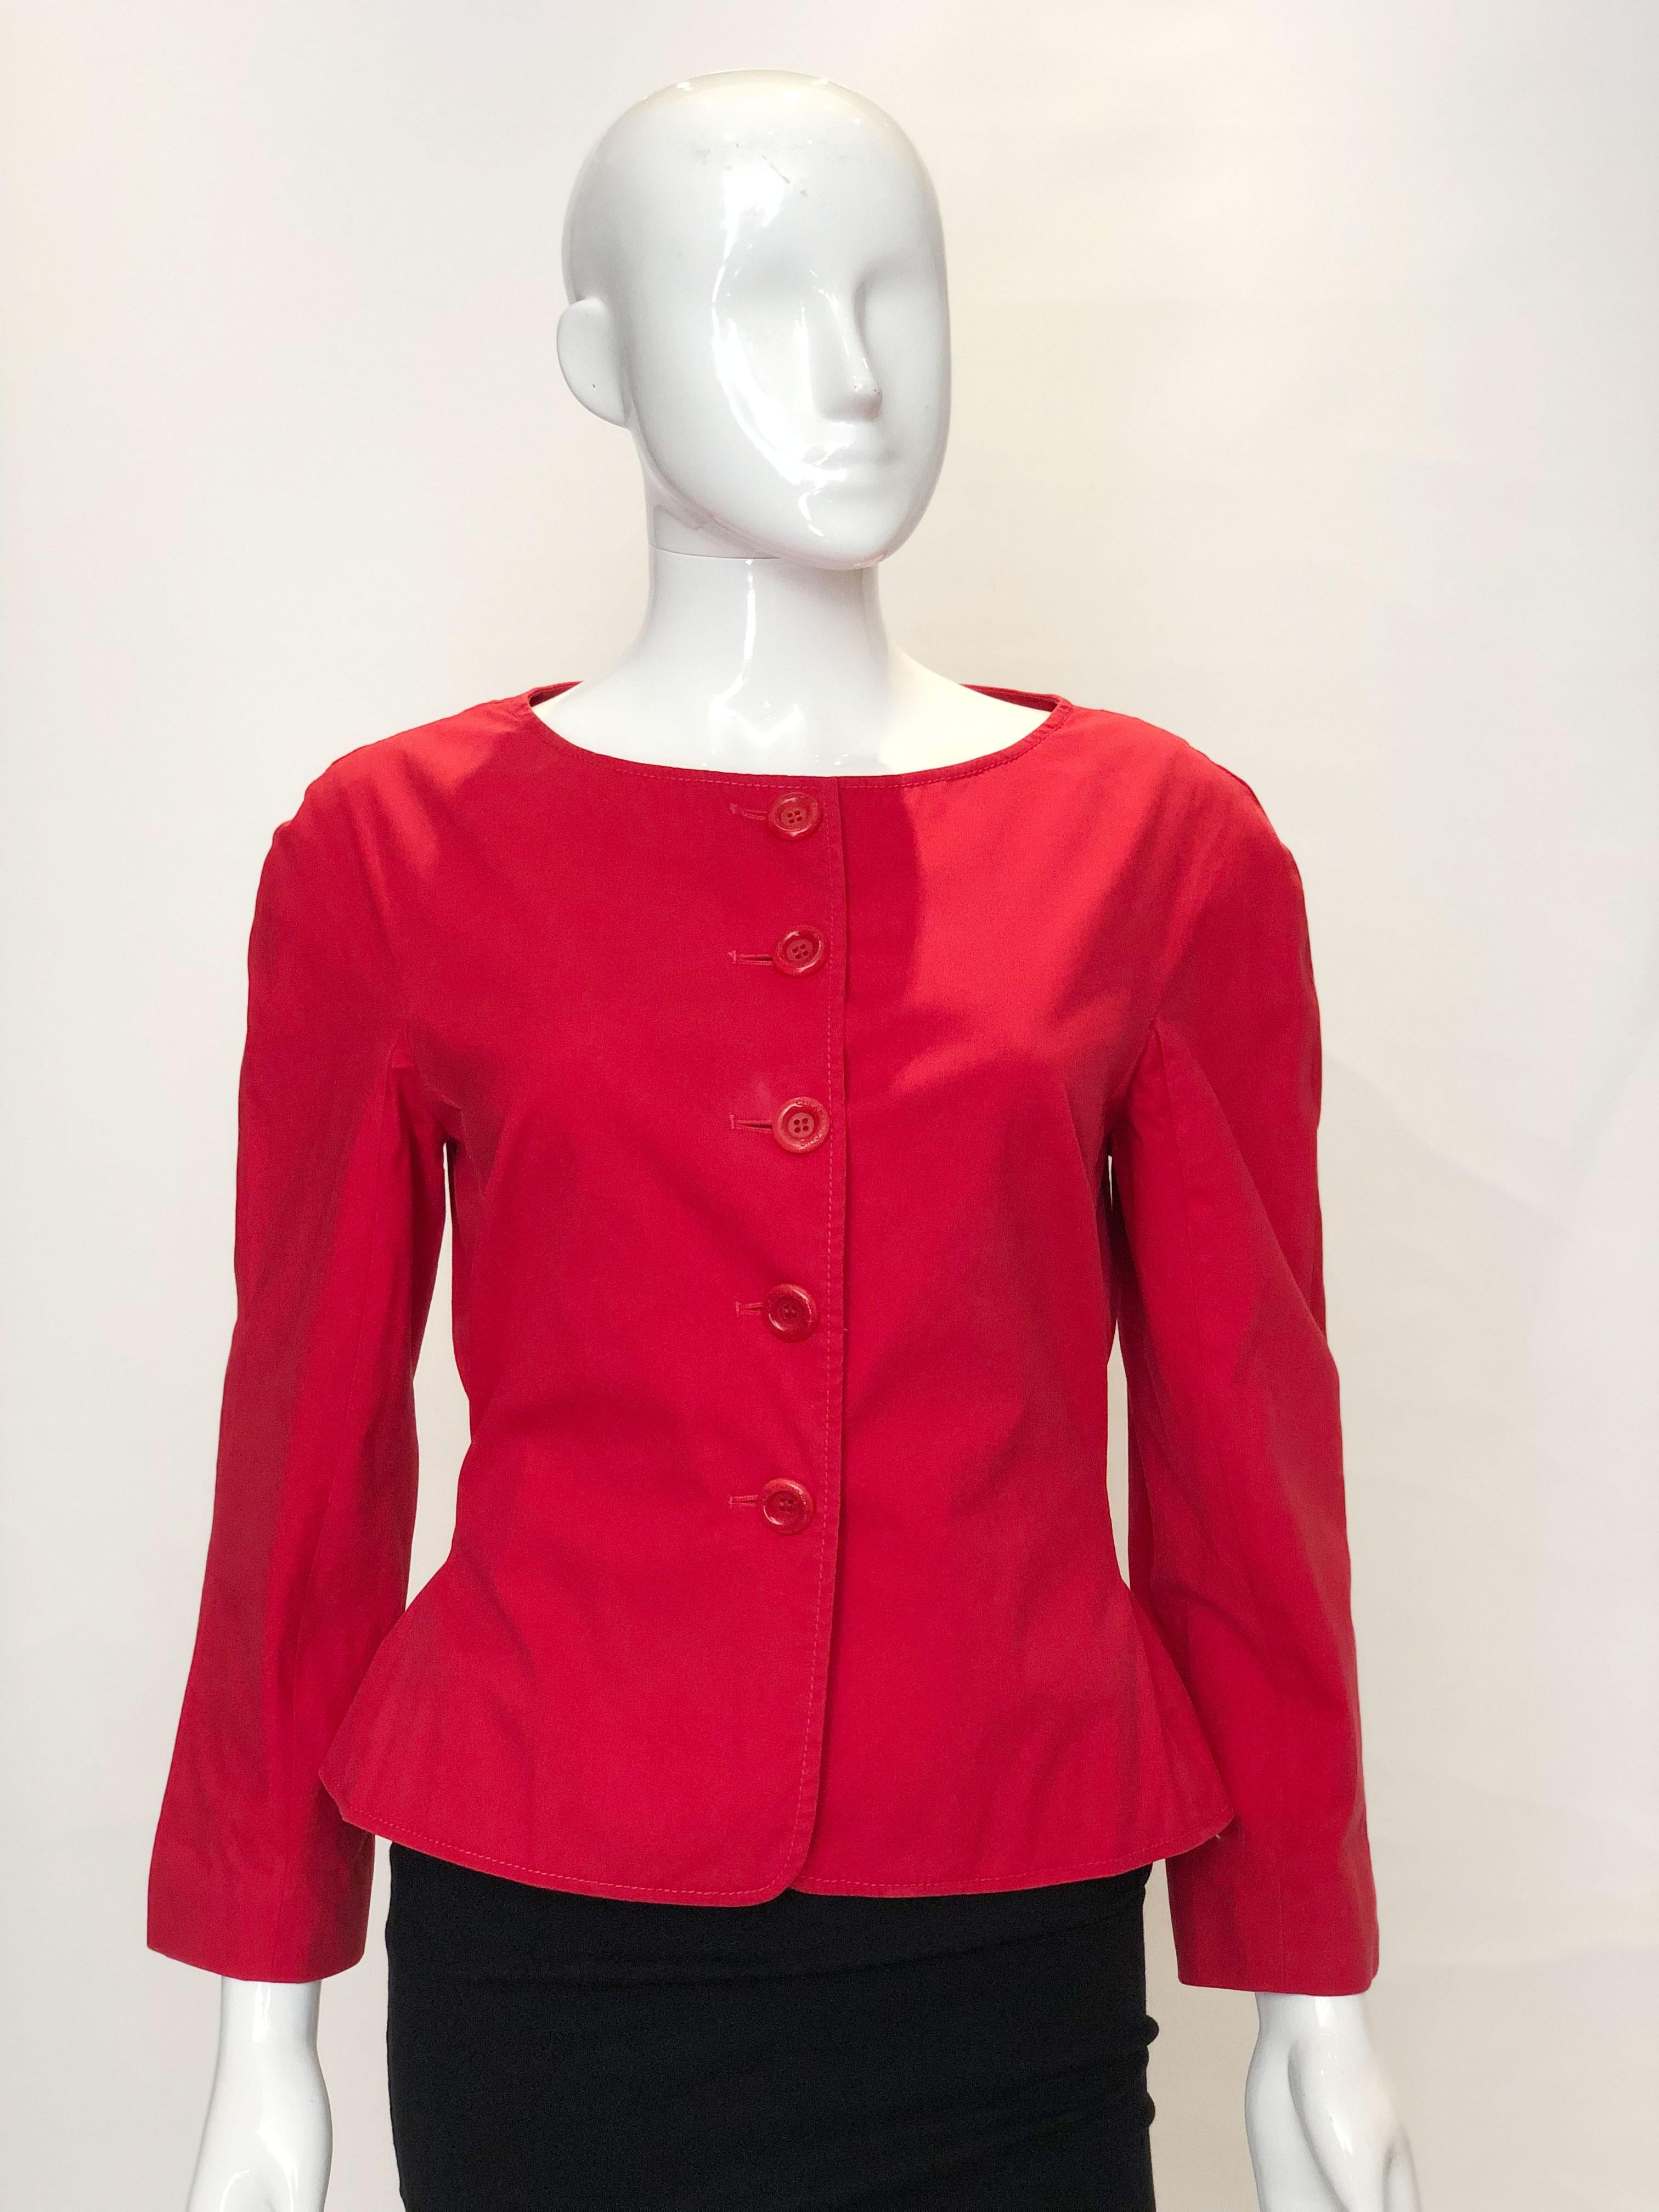 A chich red jacket by Moschino 'cheap and chic' . The jacket has a round neckline, tie back  and is fully lined.